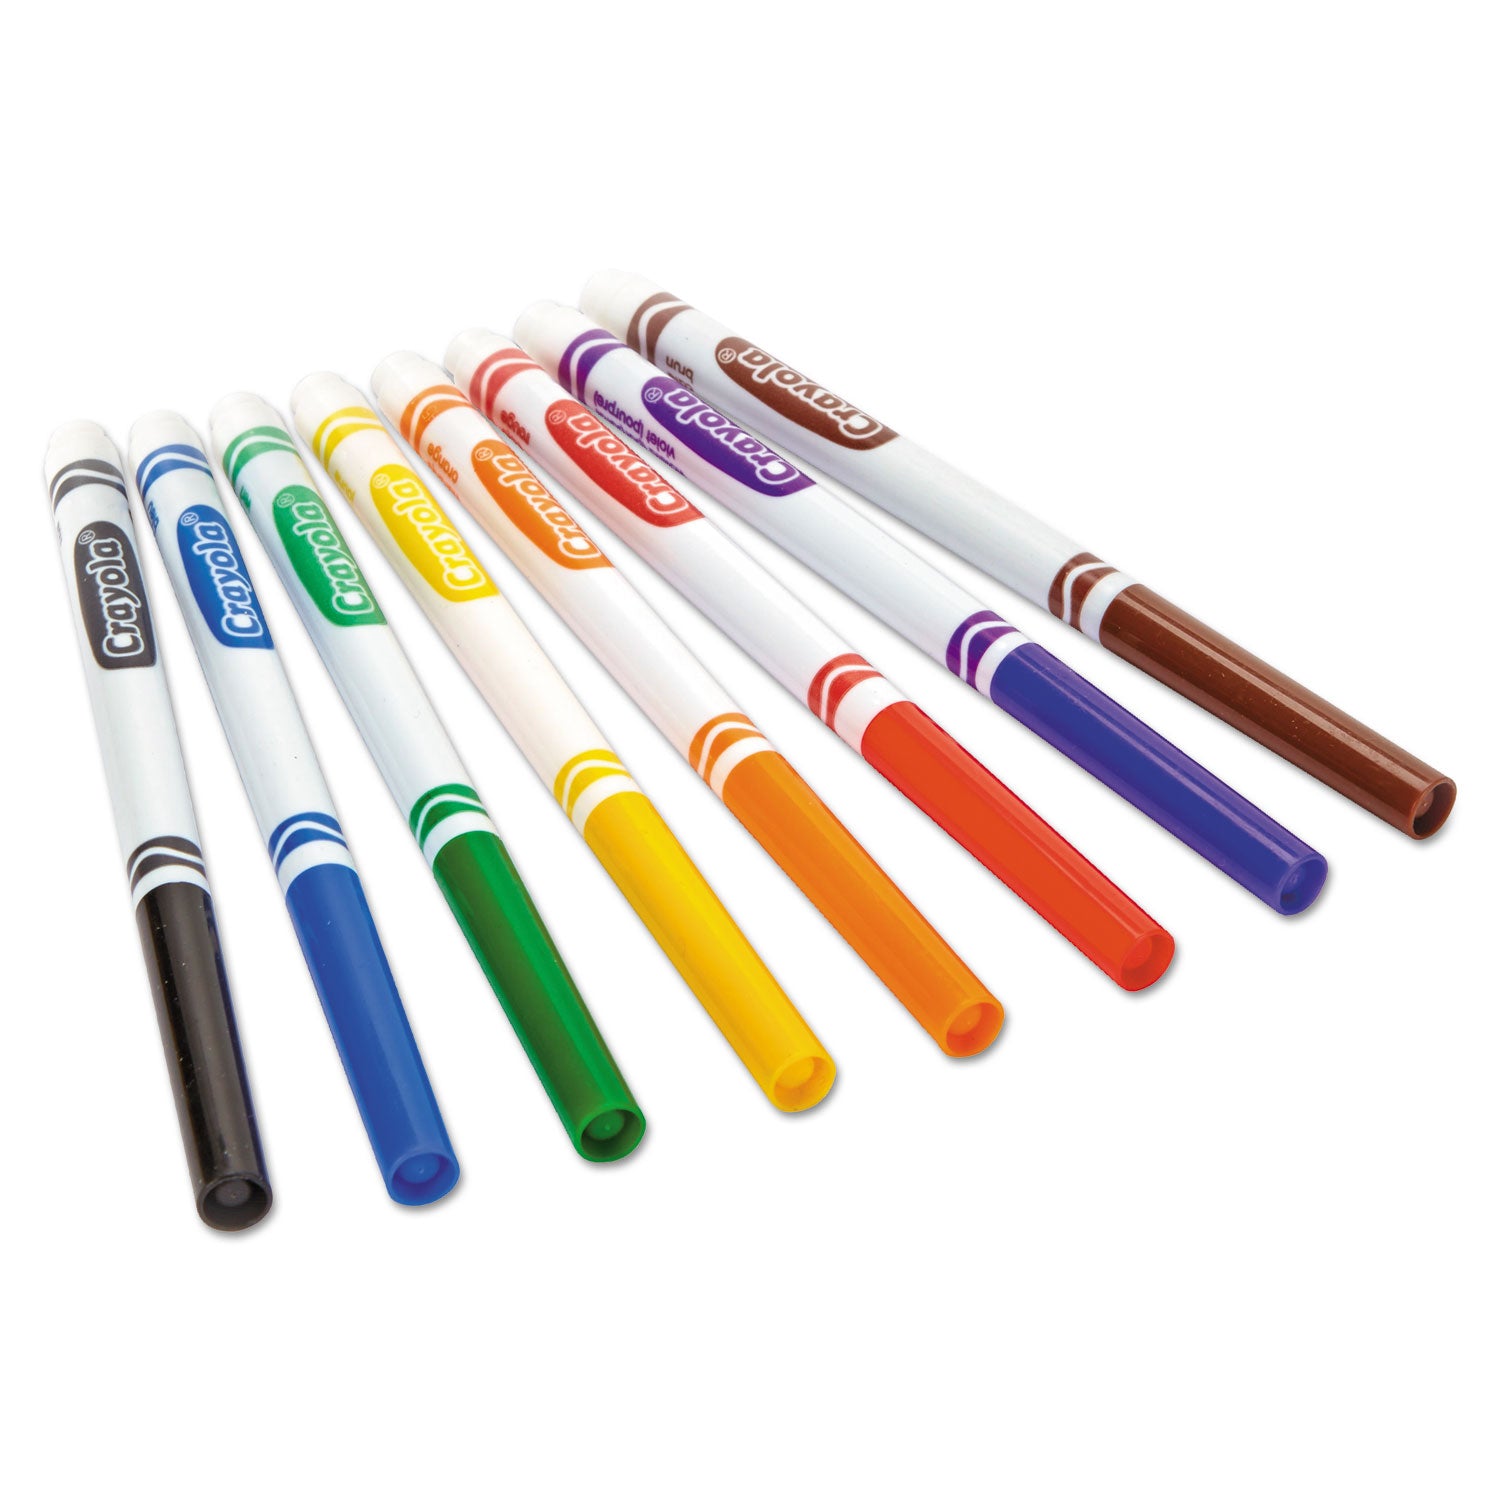 Non-Washable Marker, Fine Bullet Tip, Assorted Classic Colors, 8/Pack - 